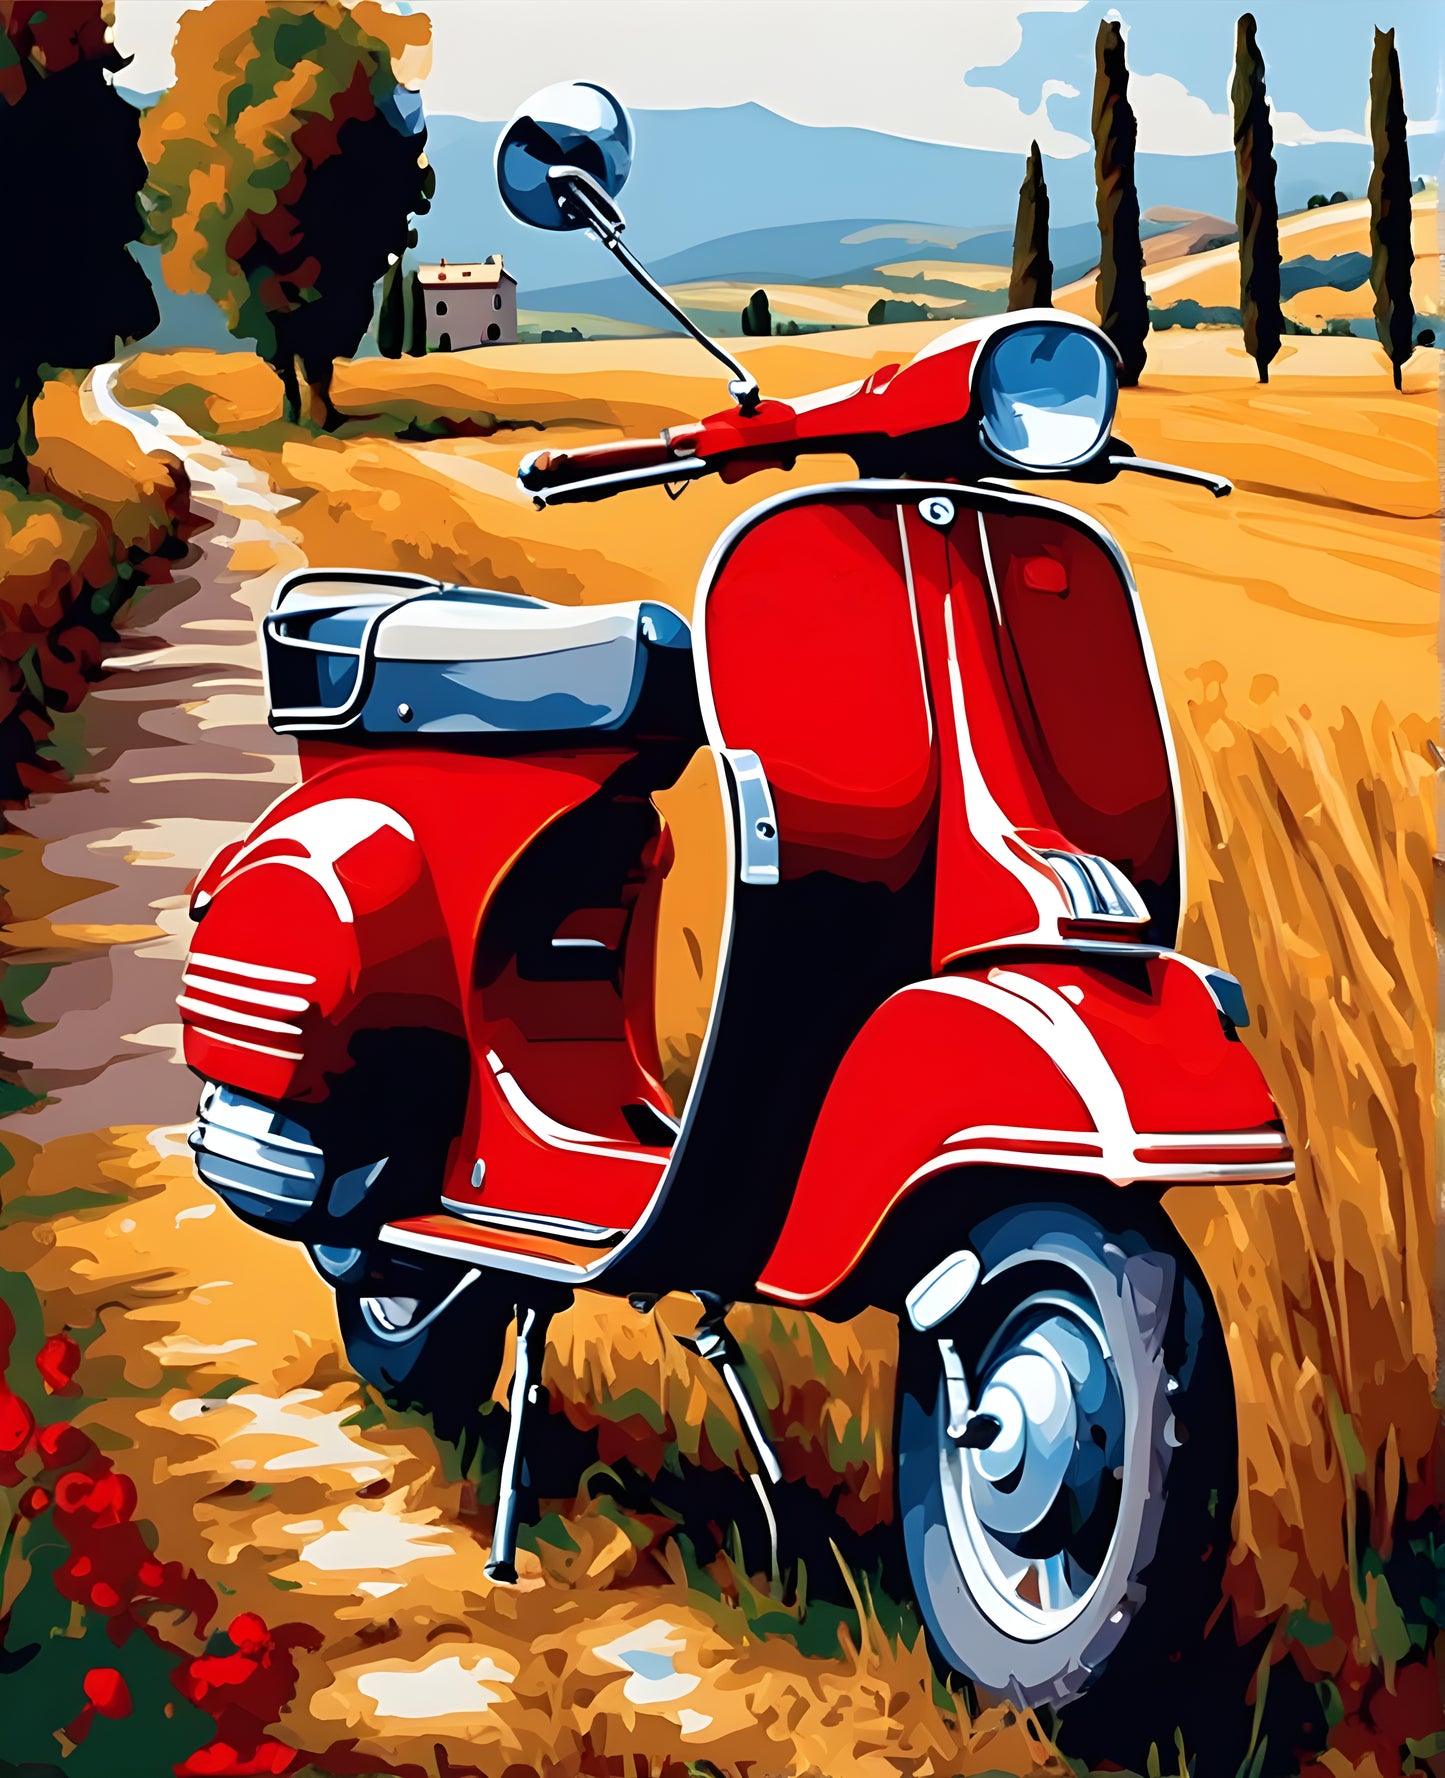 Red Vespa in Tuscany Landscape (2) - Van-Go Paint-By-Number Kit